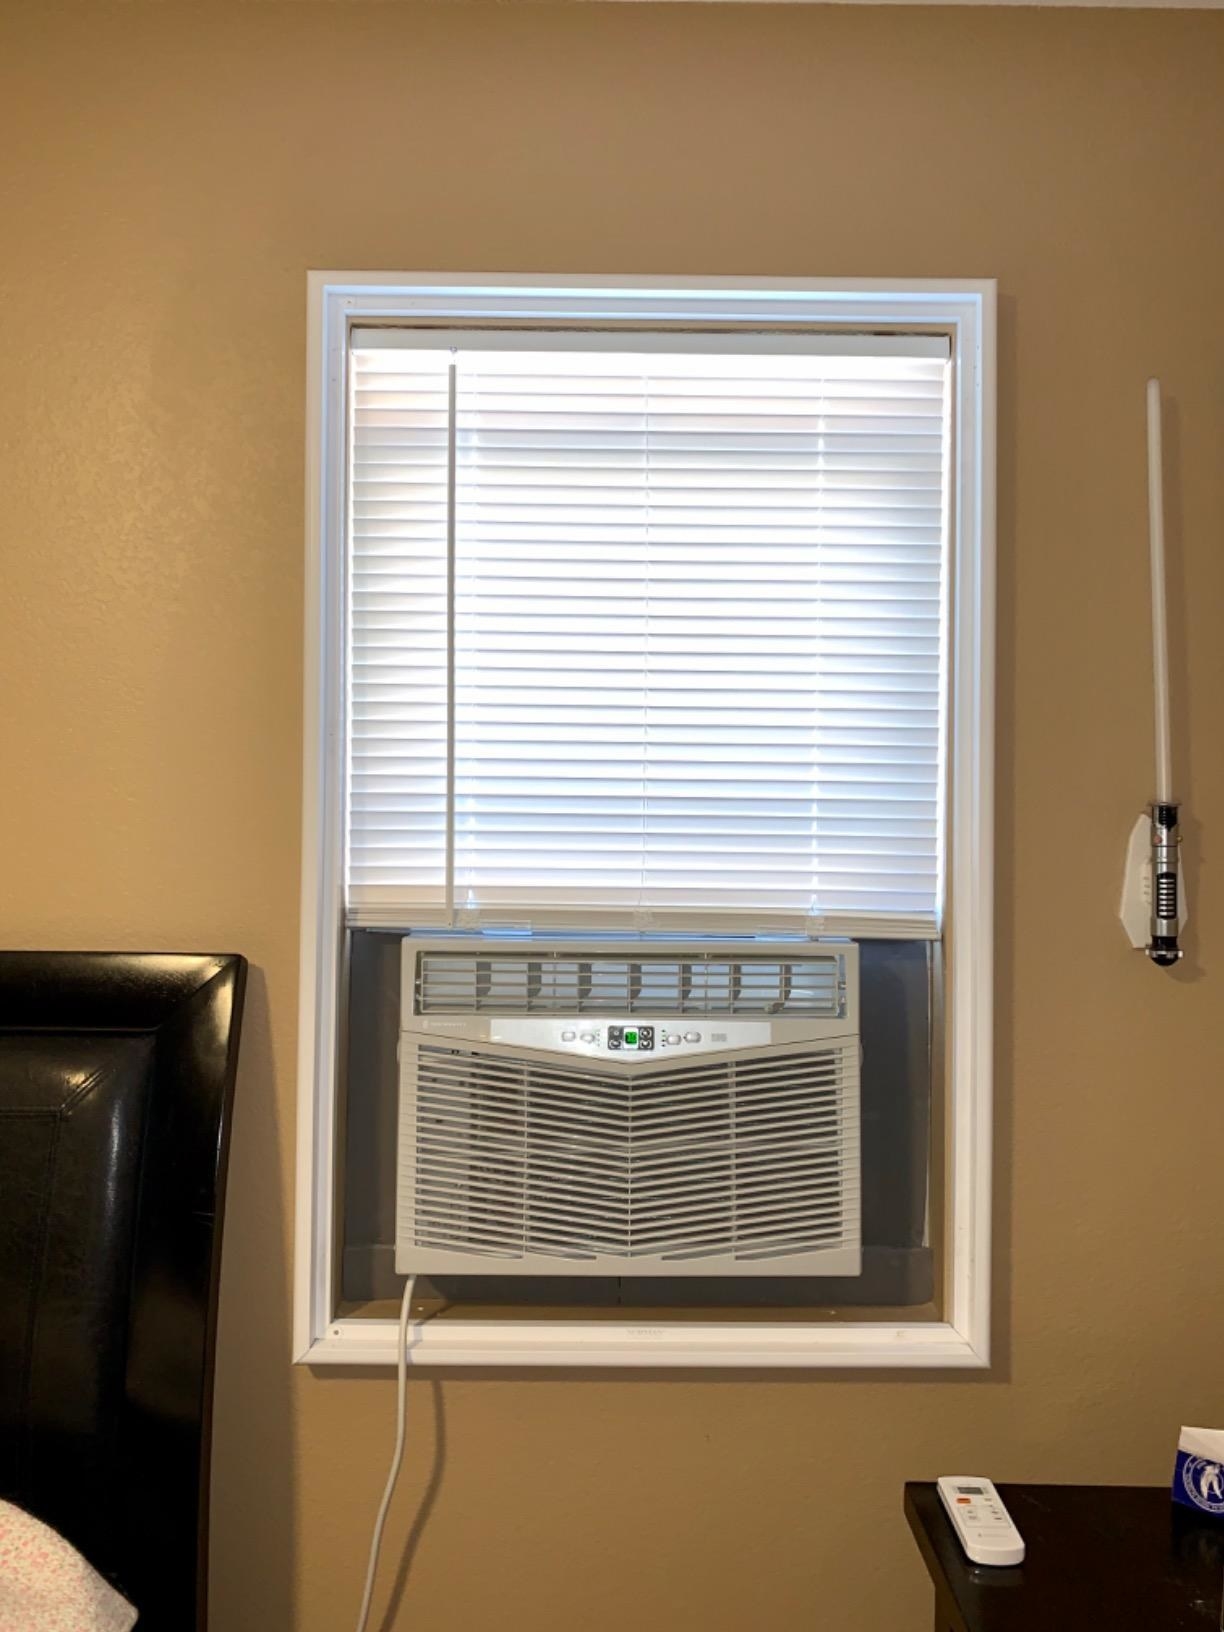 reviewer image of the TaoTronics air conditioner installed in a window